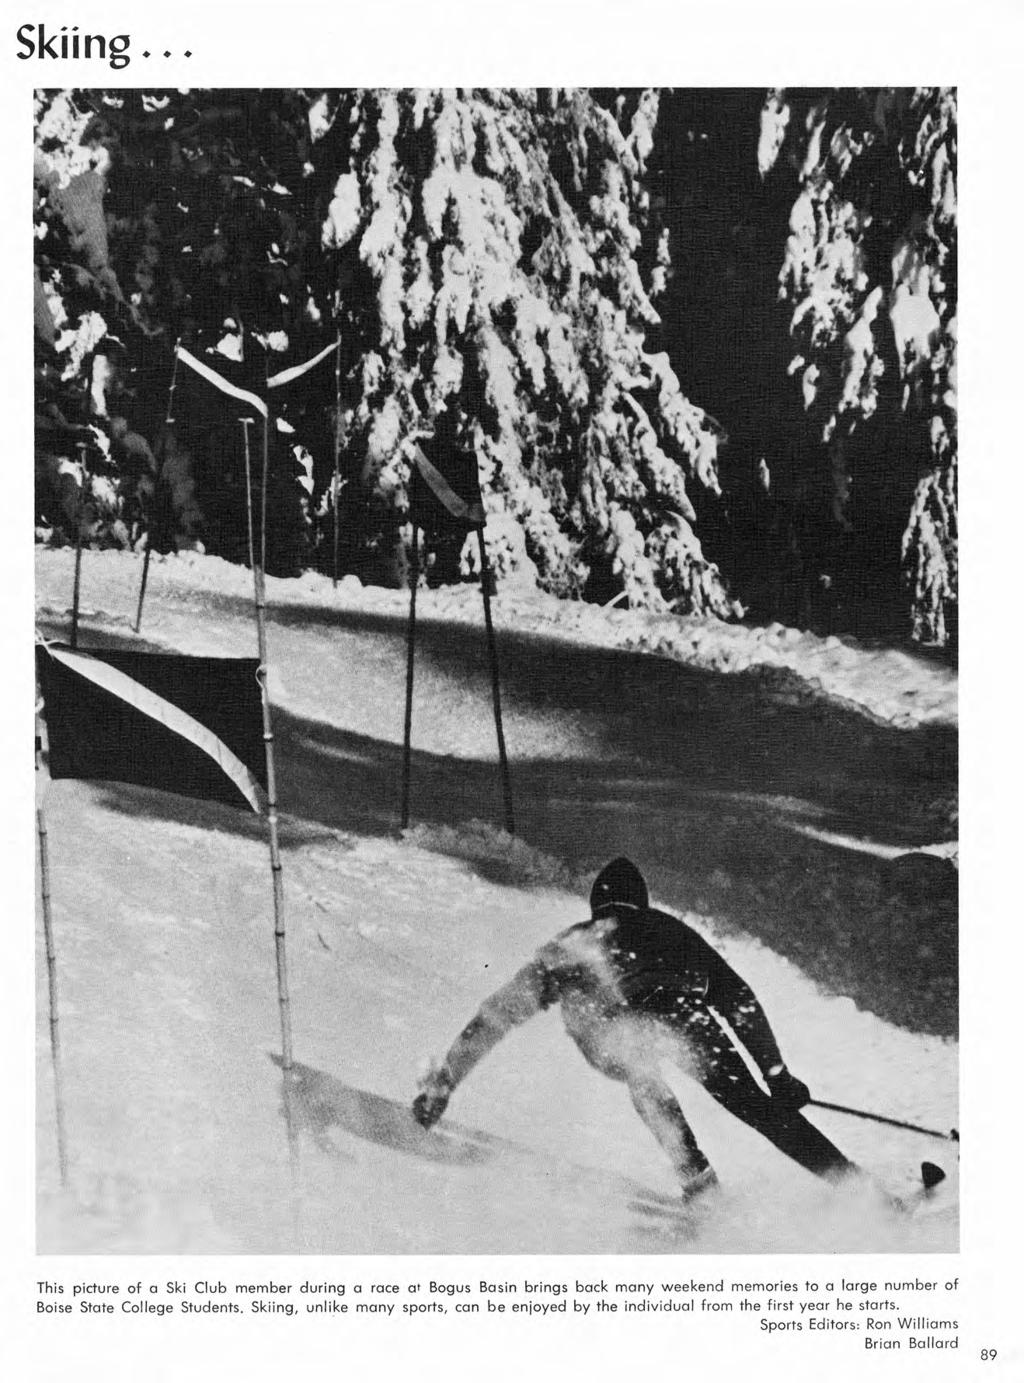 This picture of a Ski Club member during a race at Bogus Basin brings back many weekend memories to a large number of Boise State College